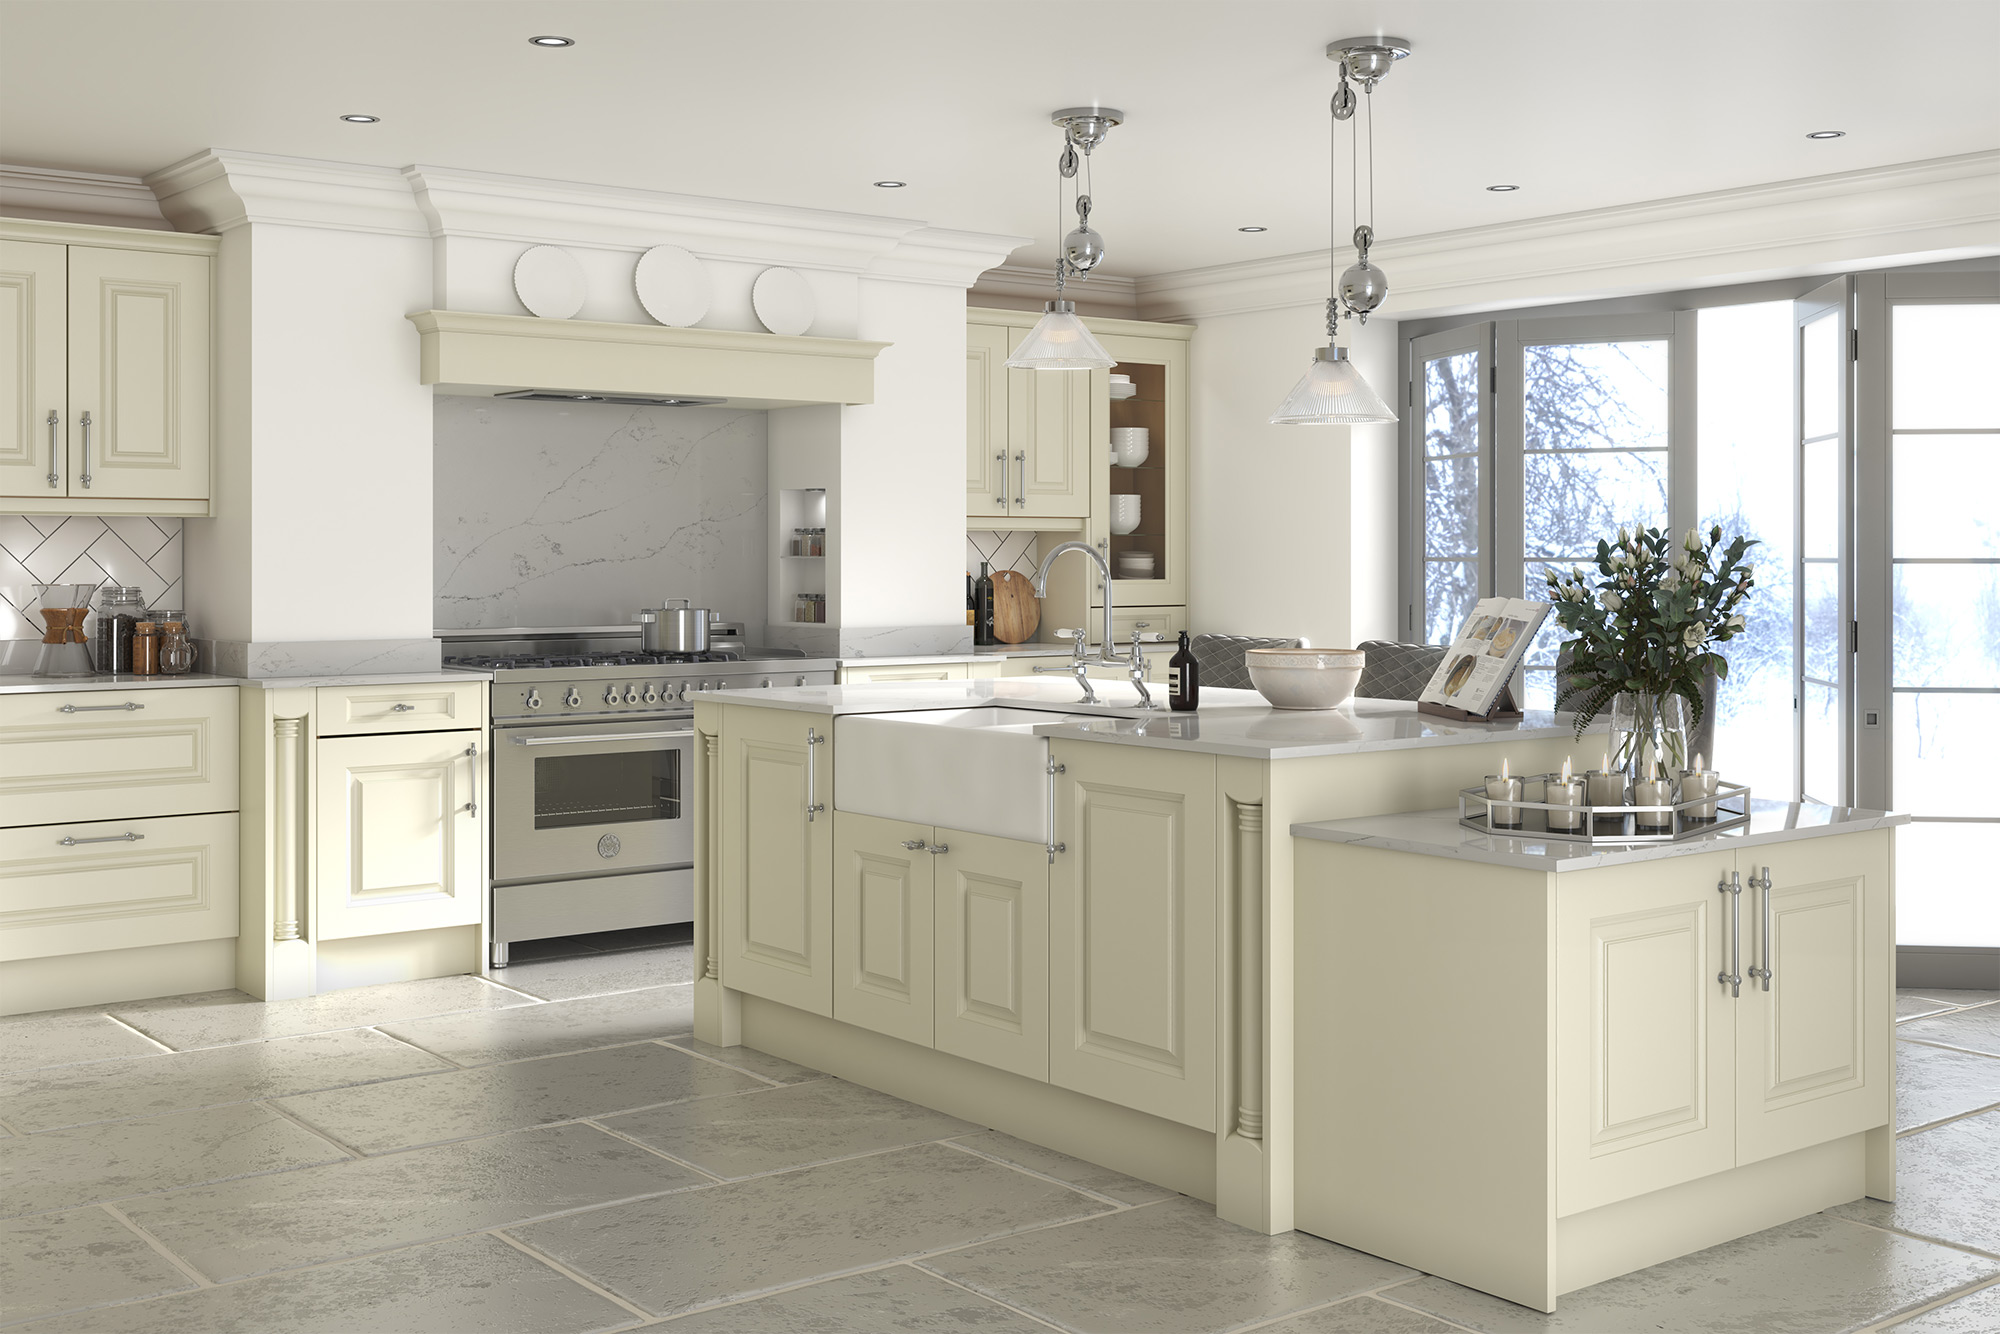 Painted Kitchens Kitchen Units At Trade Prices Diy Kitchens